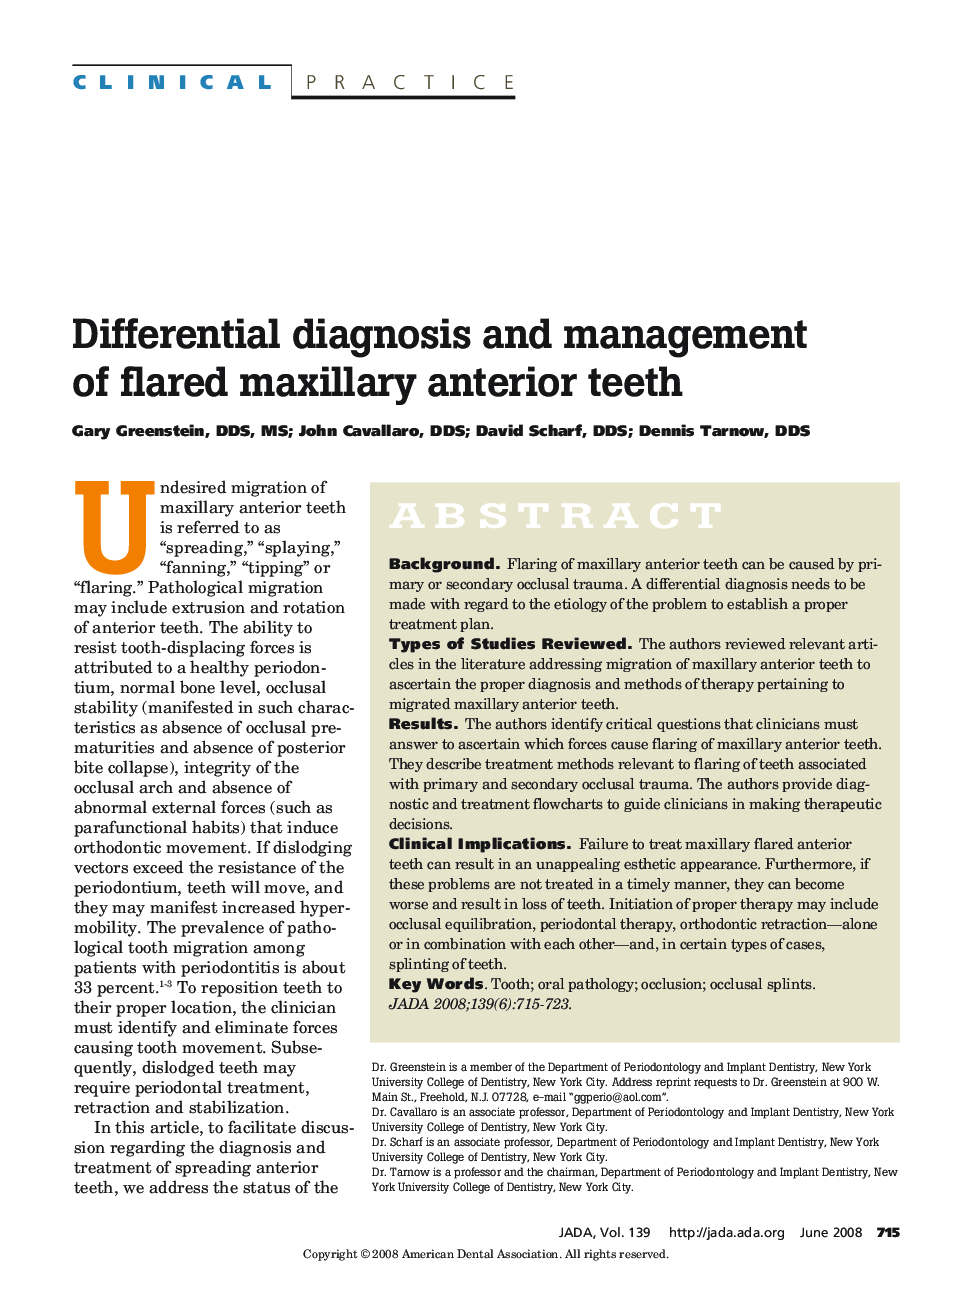 Differential Diagnosis and Management of Flared Maxillary Anterior Teeth